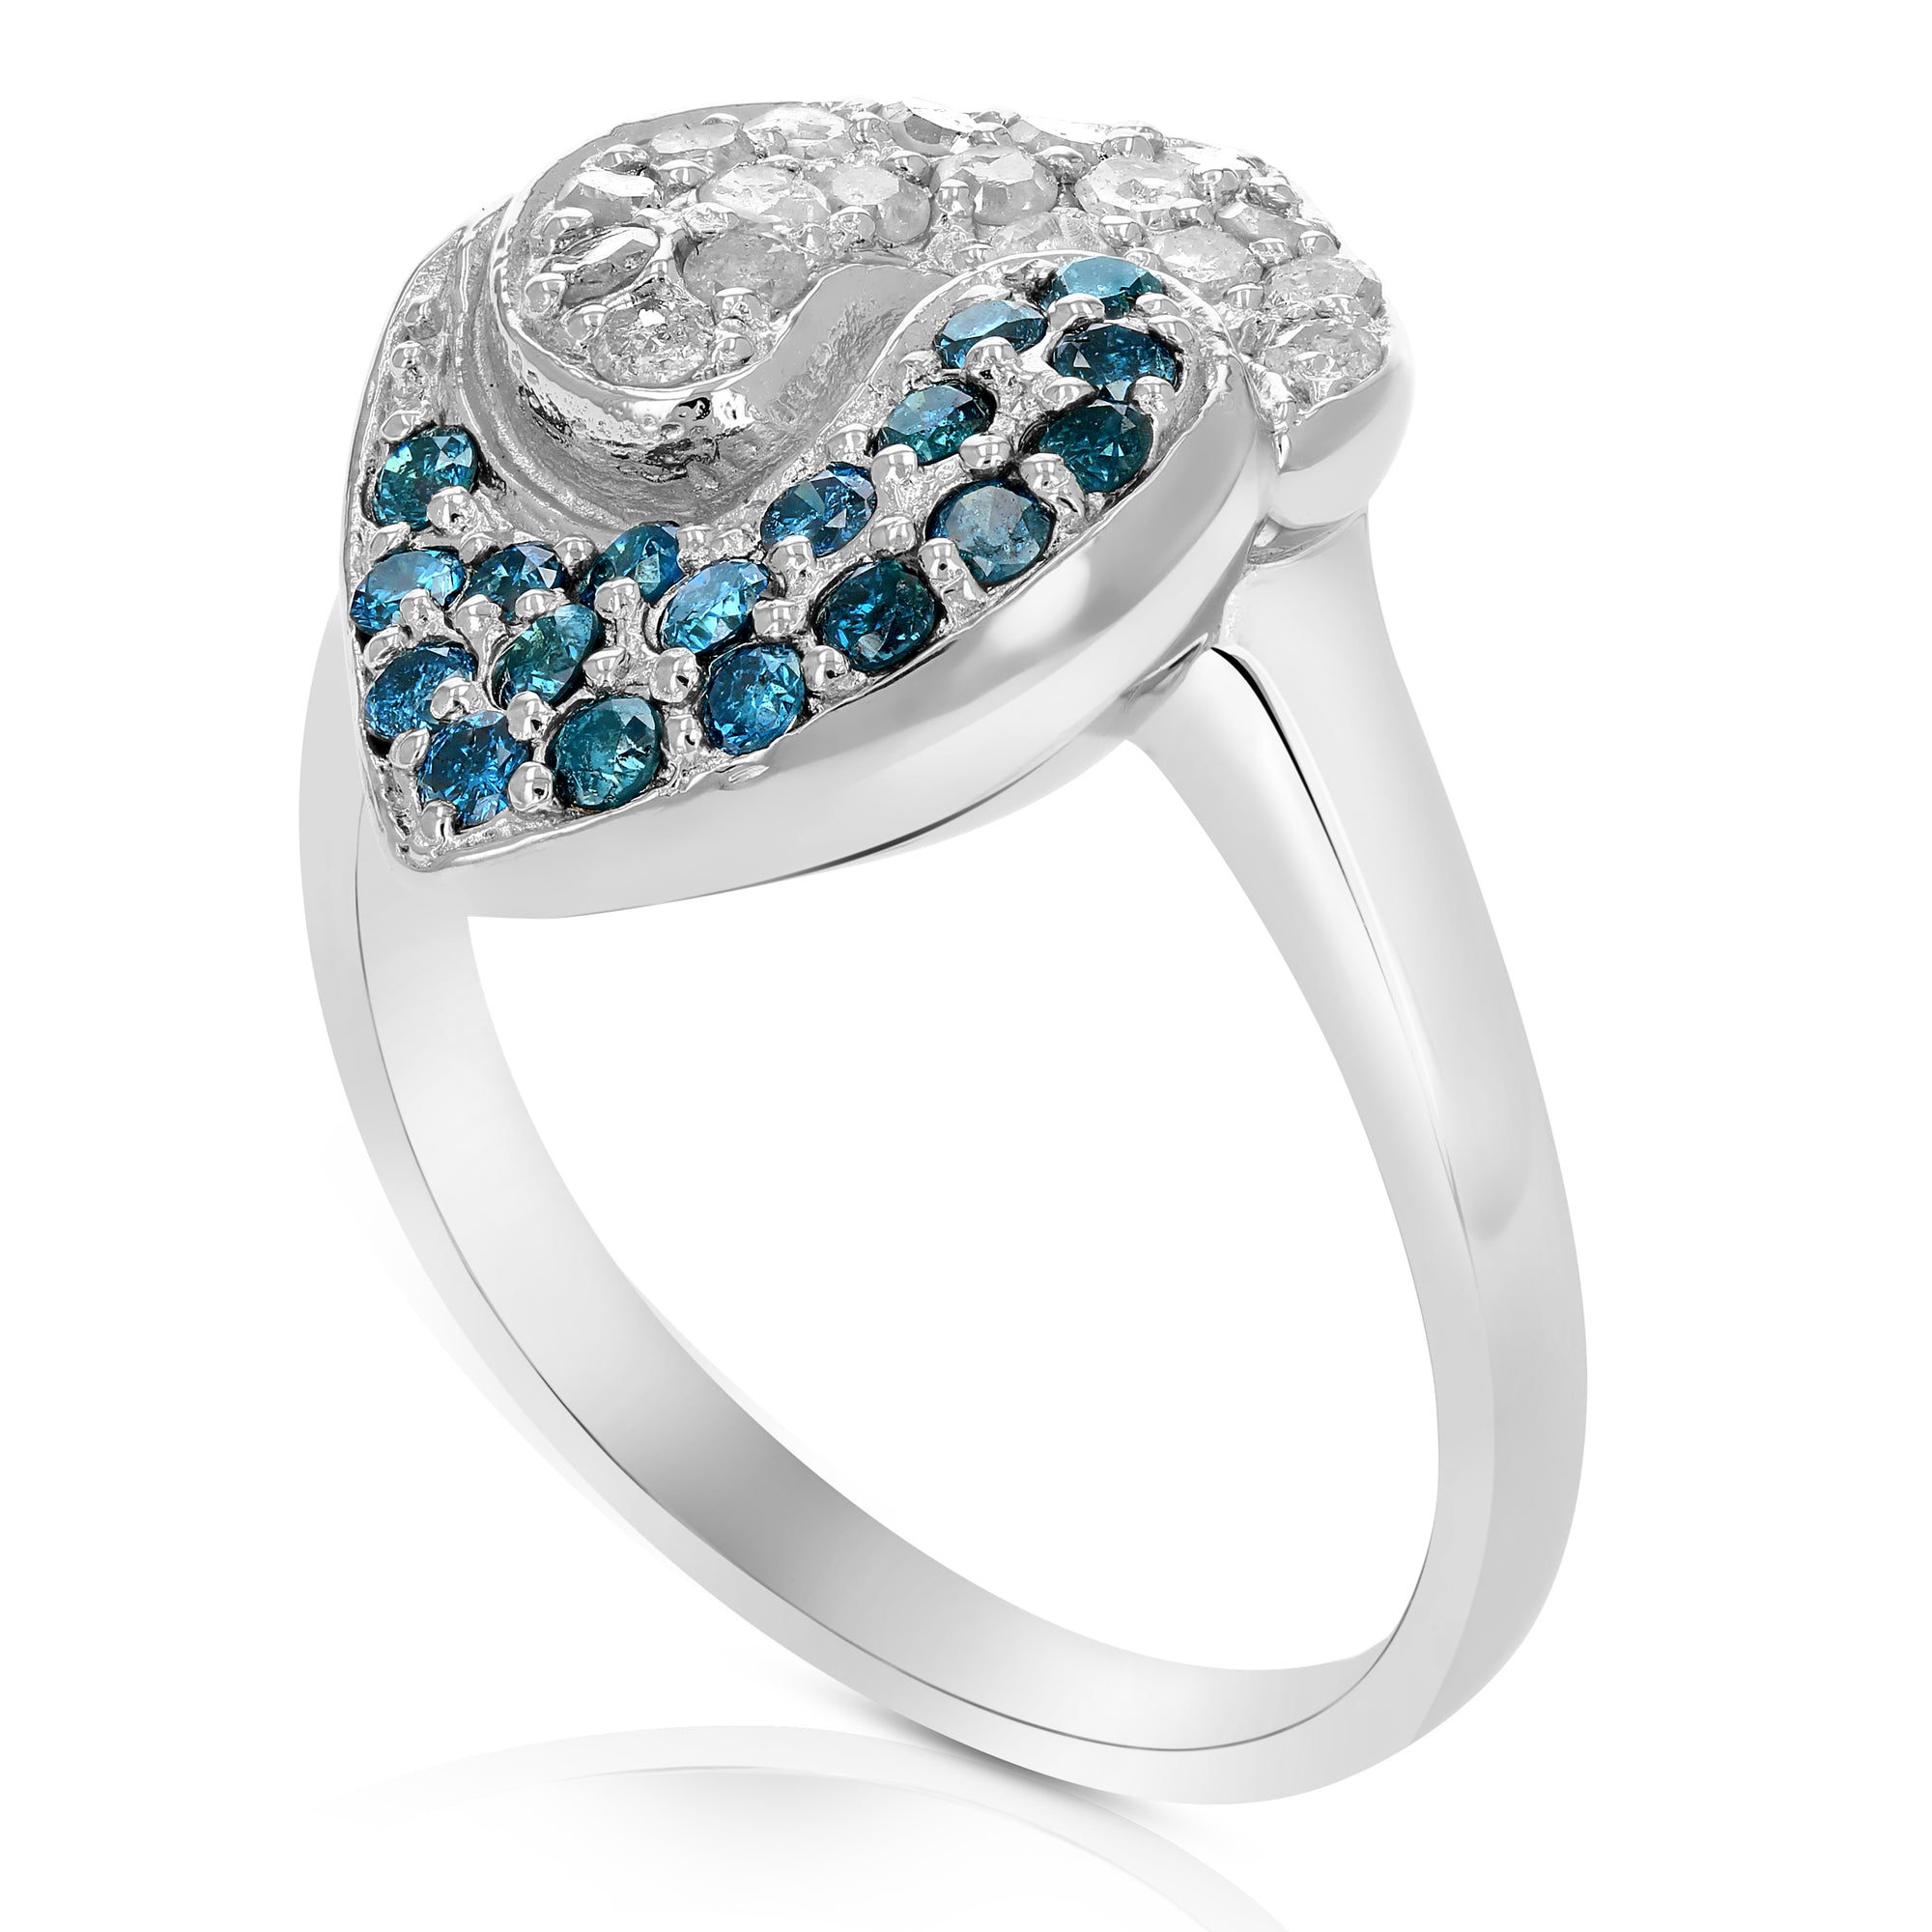 0.80 cttw Blue and White Diamond Ring .925 Sterling Silver with Rhodium Plating